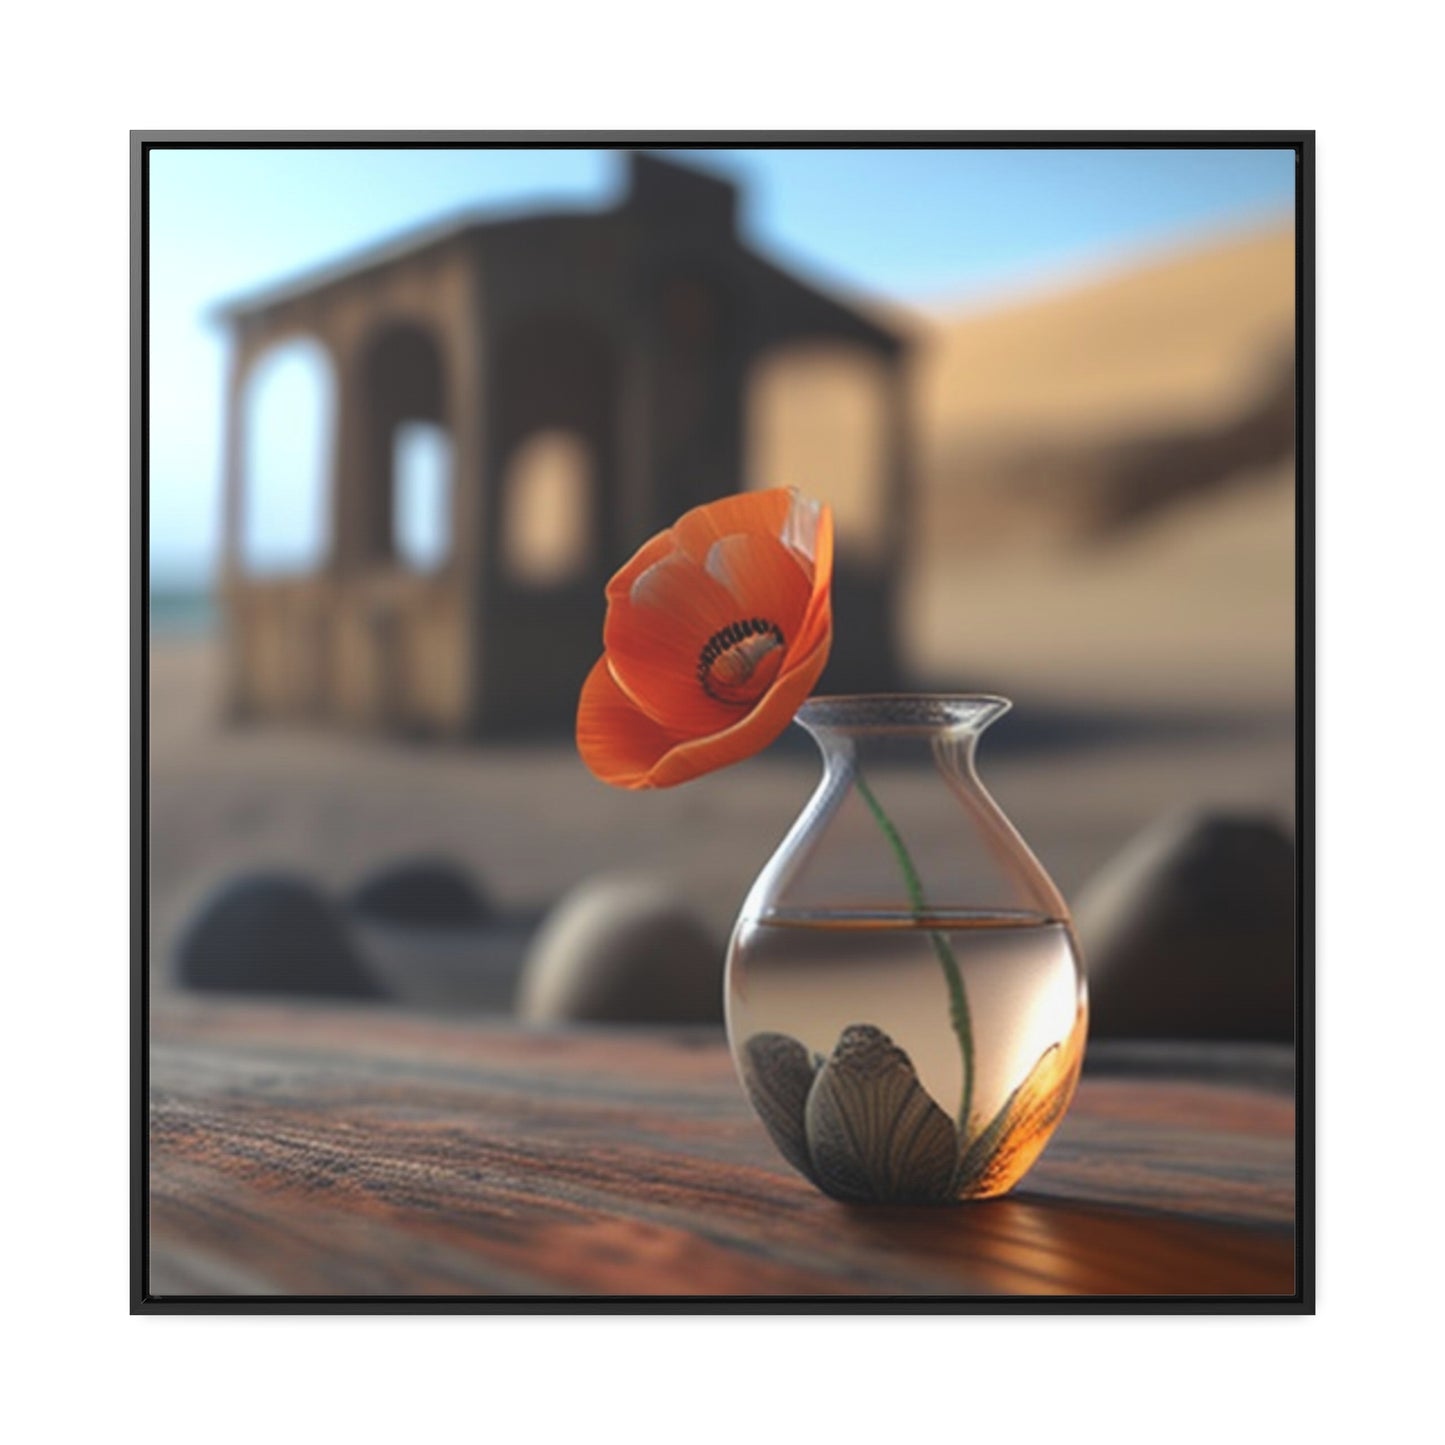 Gallery Canvas Wraps, Square Frame Poppy in a Glass Vase 1